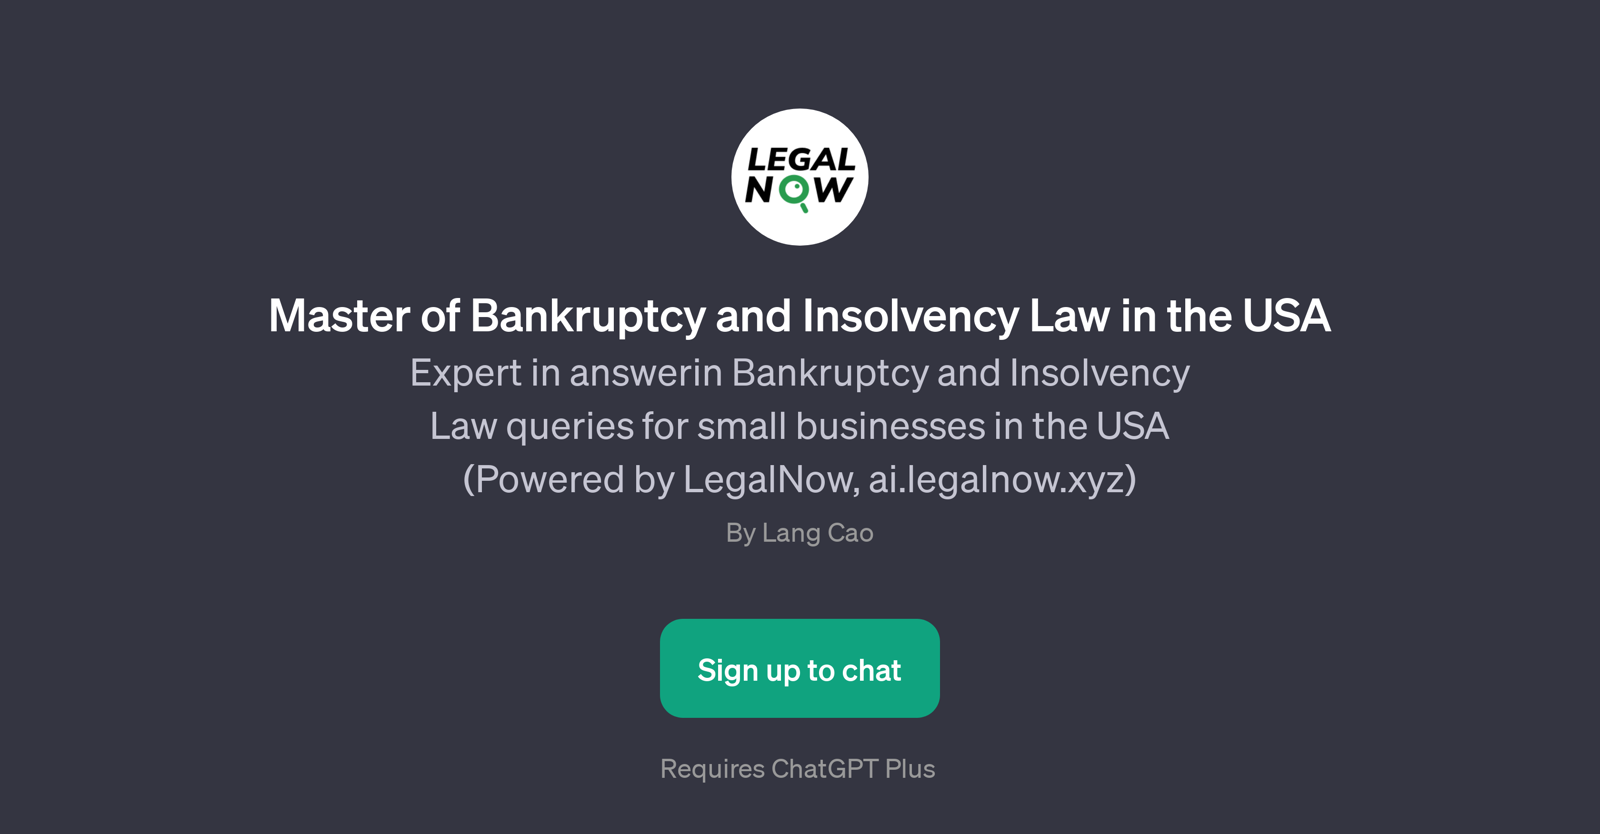 Master of Bankruptcy and Insolvency Law in the USA website